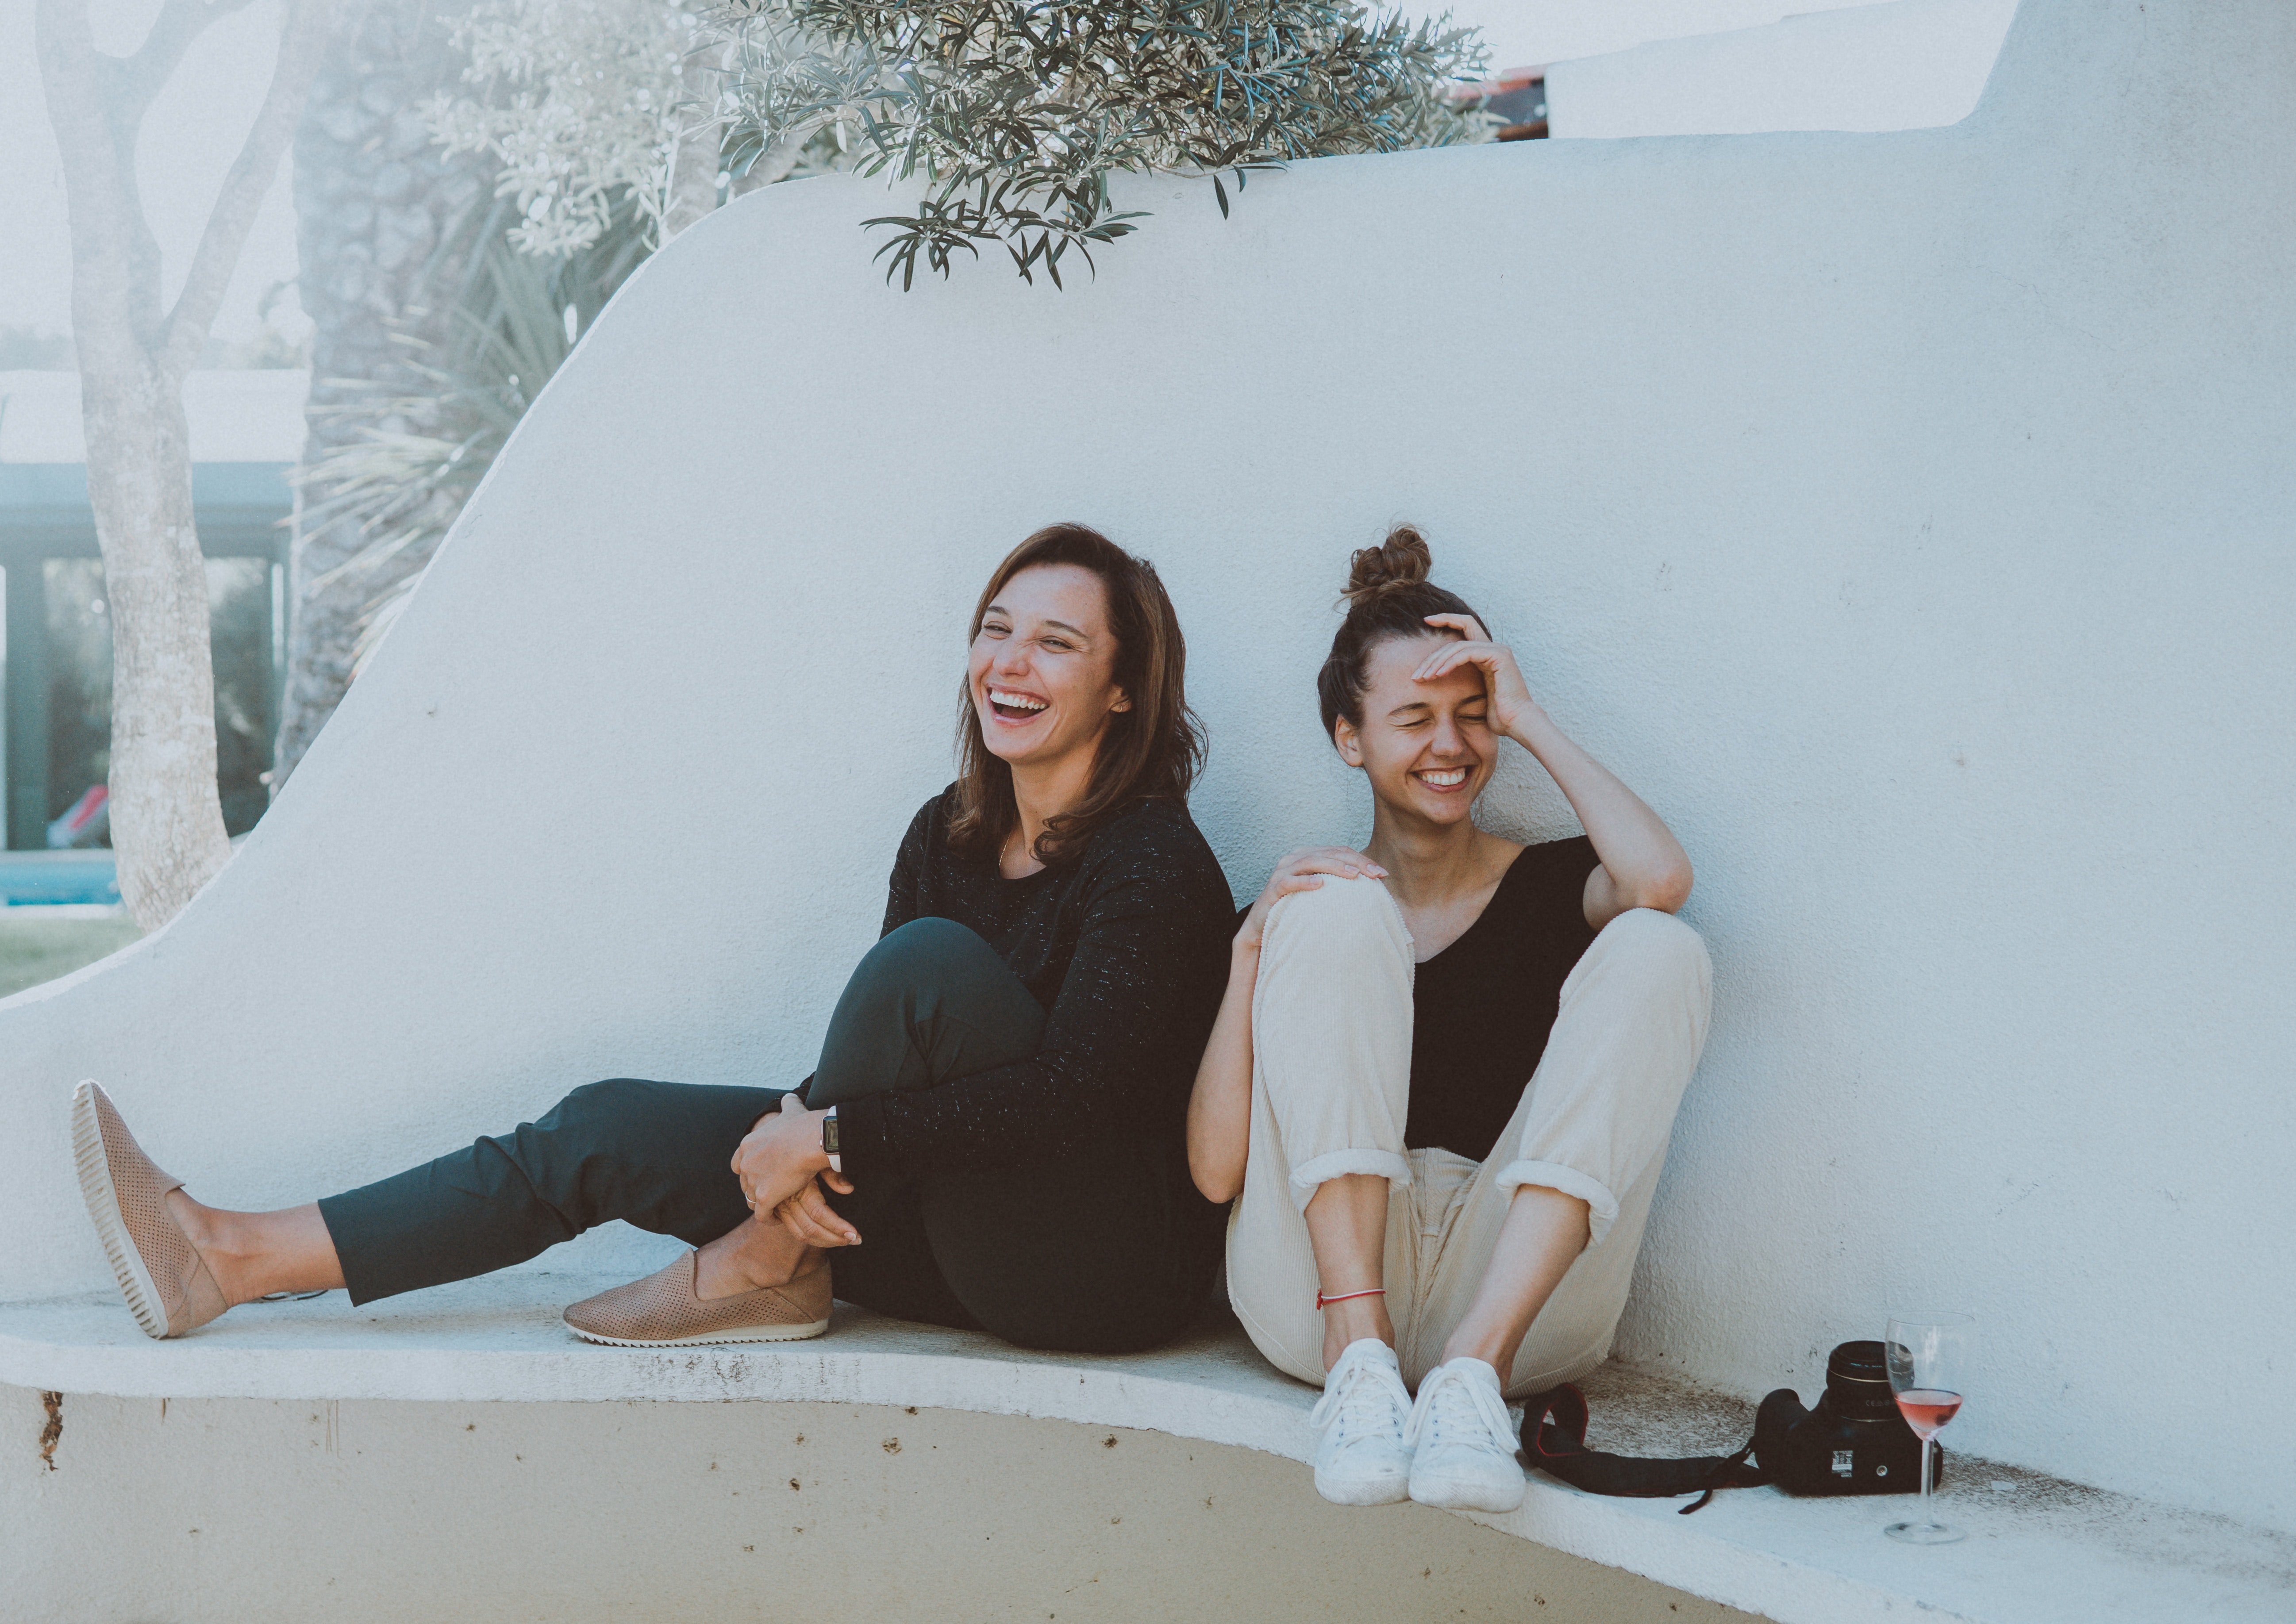 Sisters sitting outdoors, laughing together. | Source: Pexels